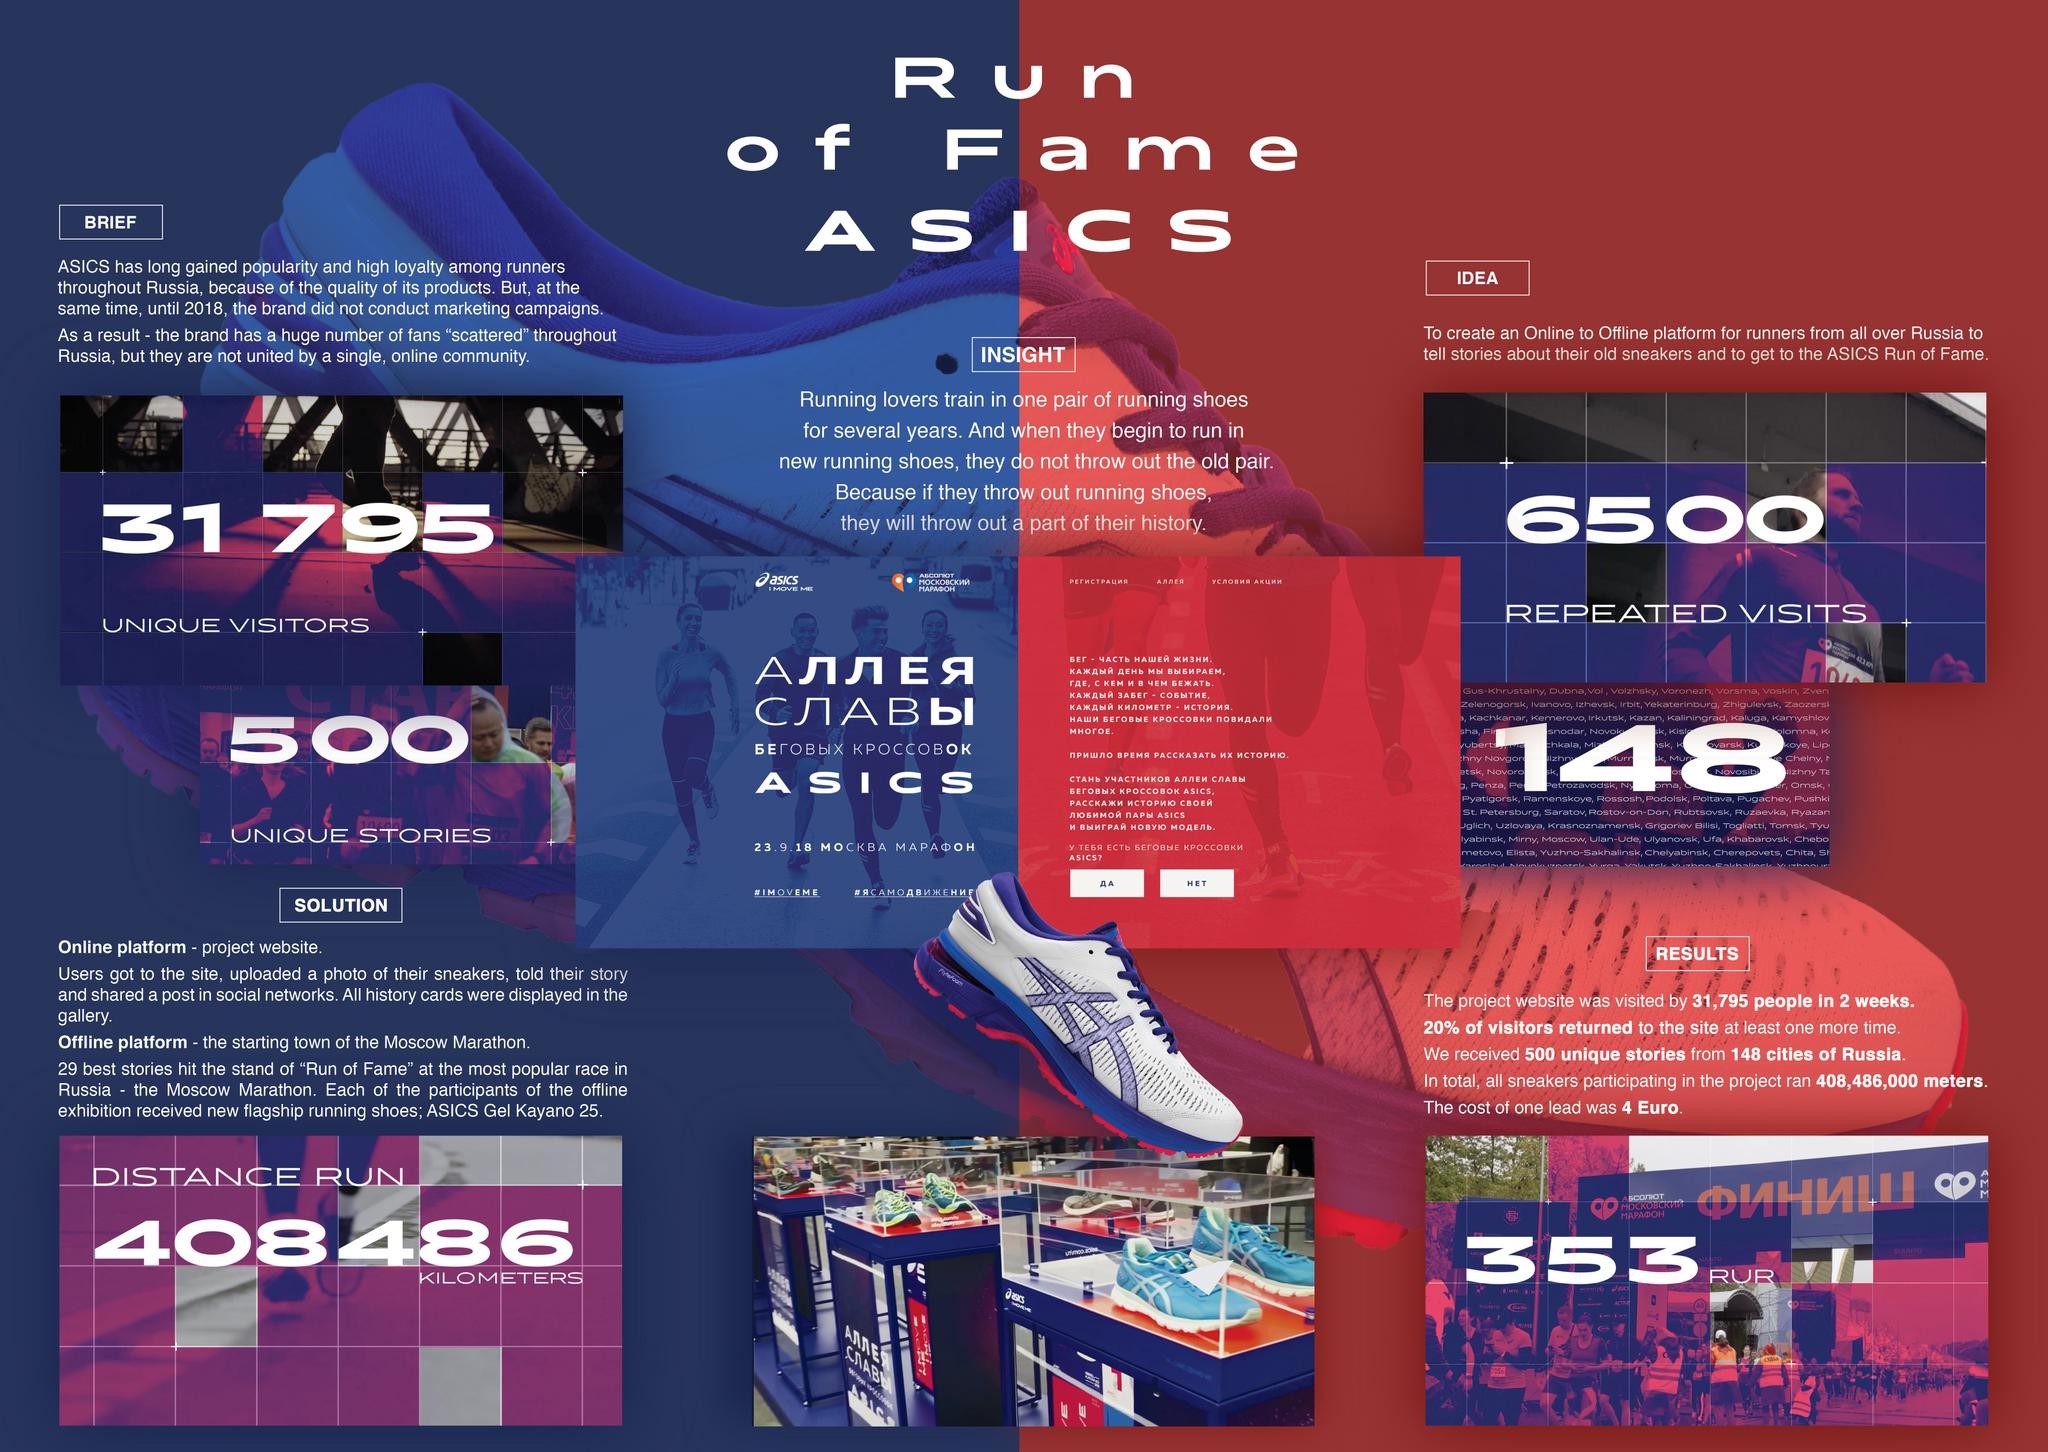 Run of Fame of ASICS running shoes